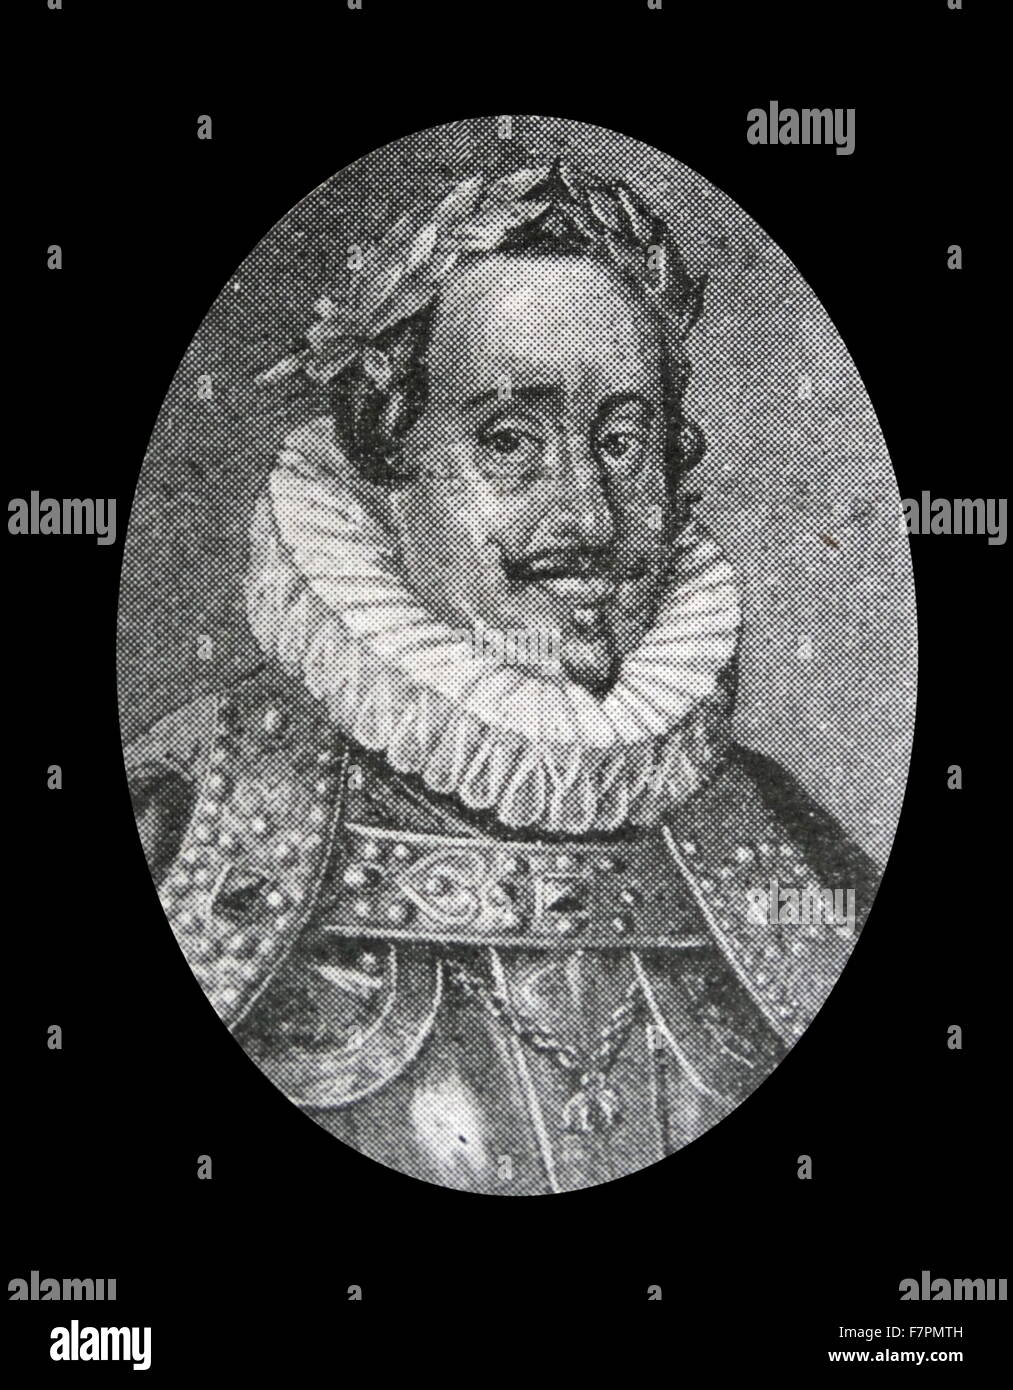 King Ferdinand II. From the House of Hapsburg, the ruler of Bohemia and Hungary, he met a revolt of Bohemia in 1619. Stock Photo